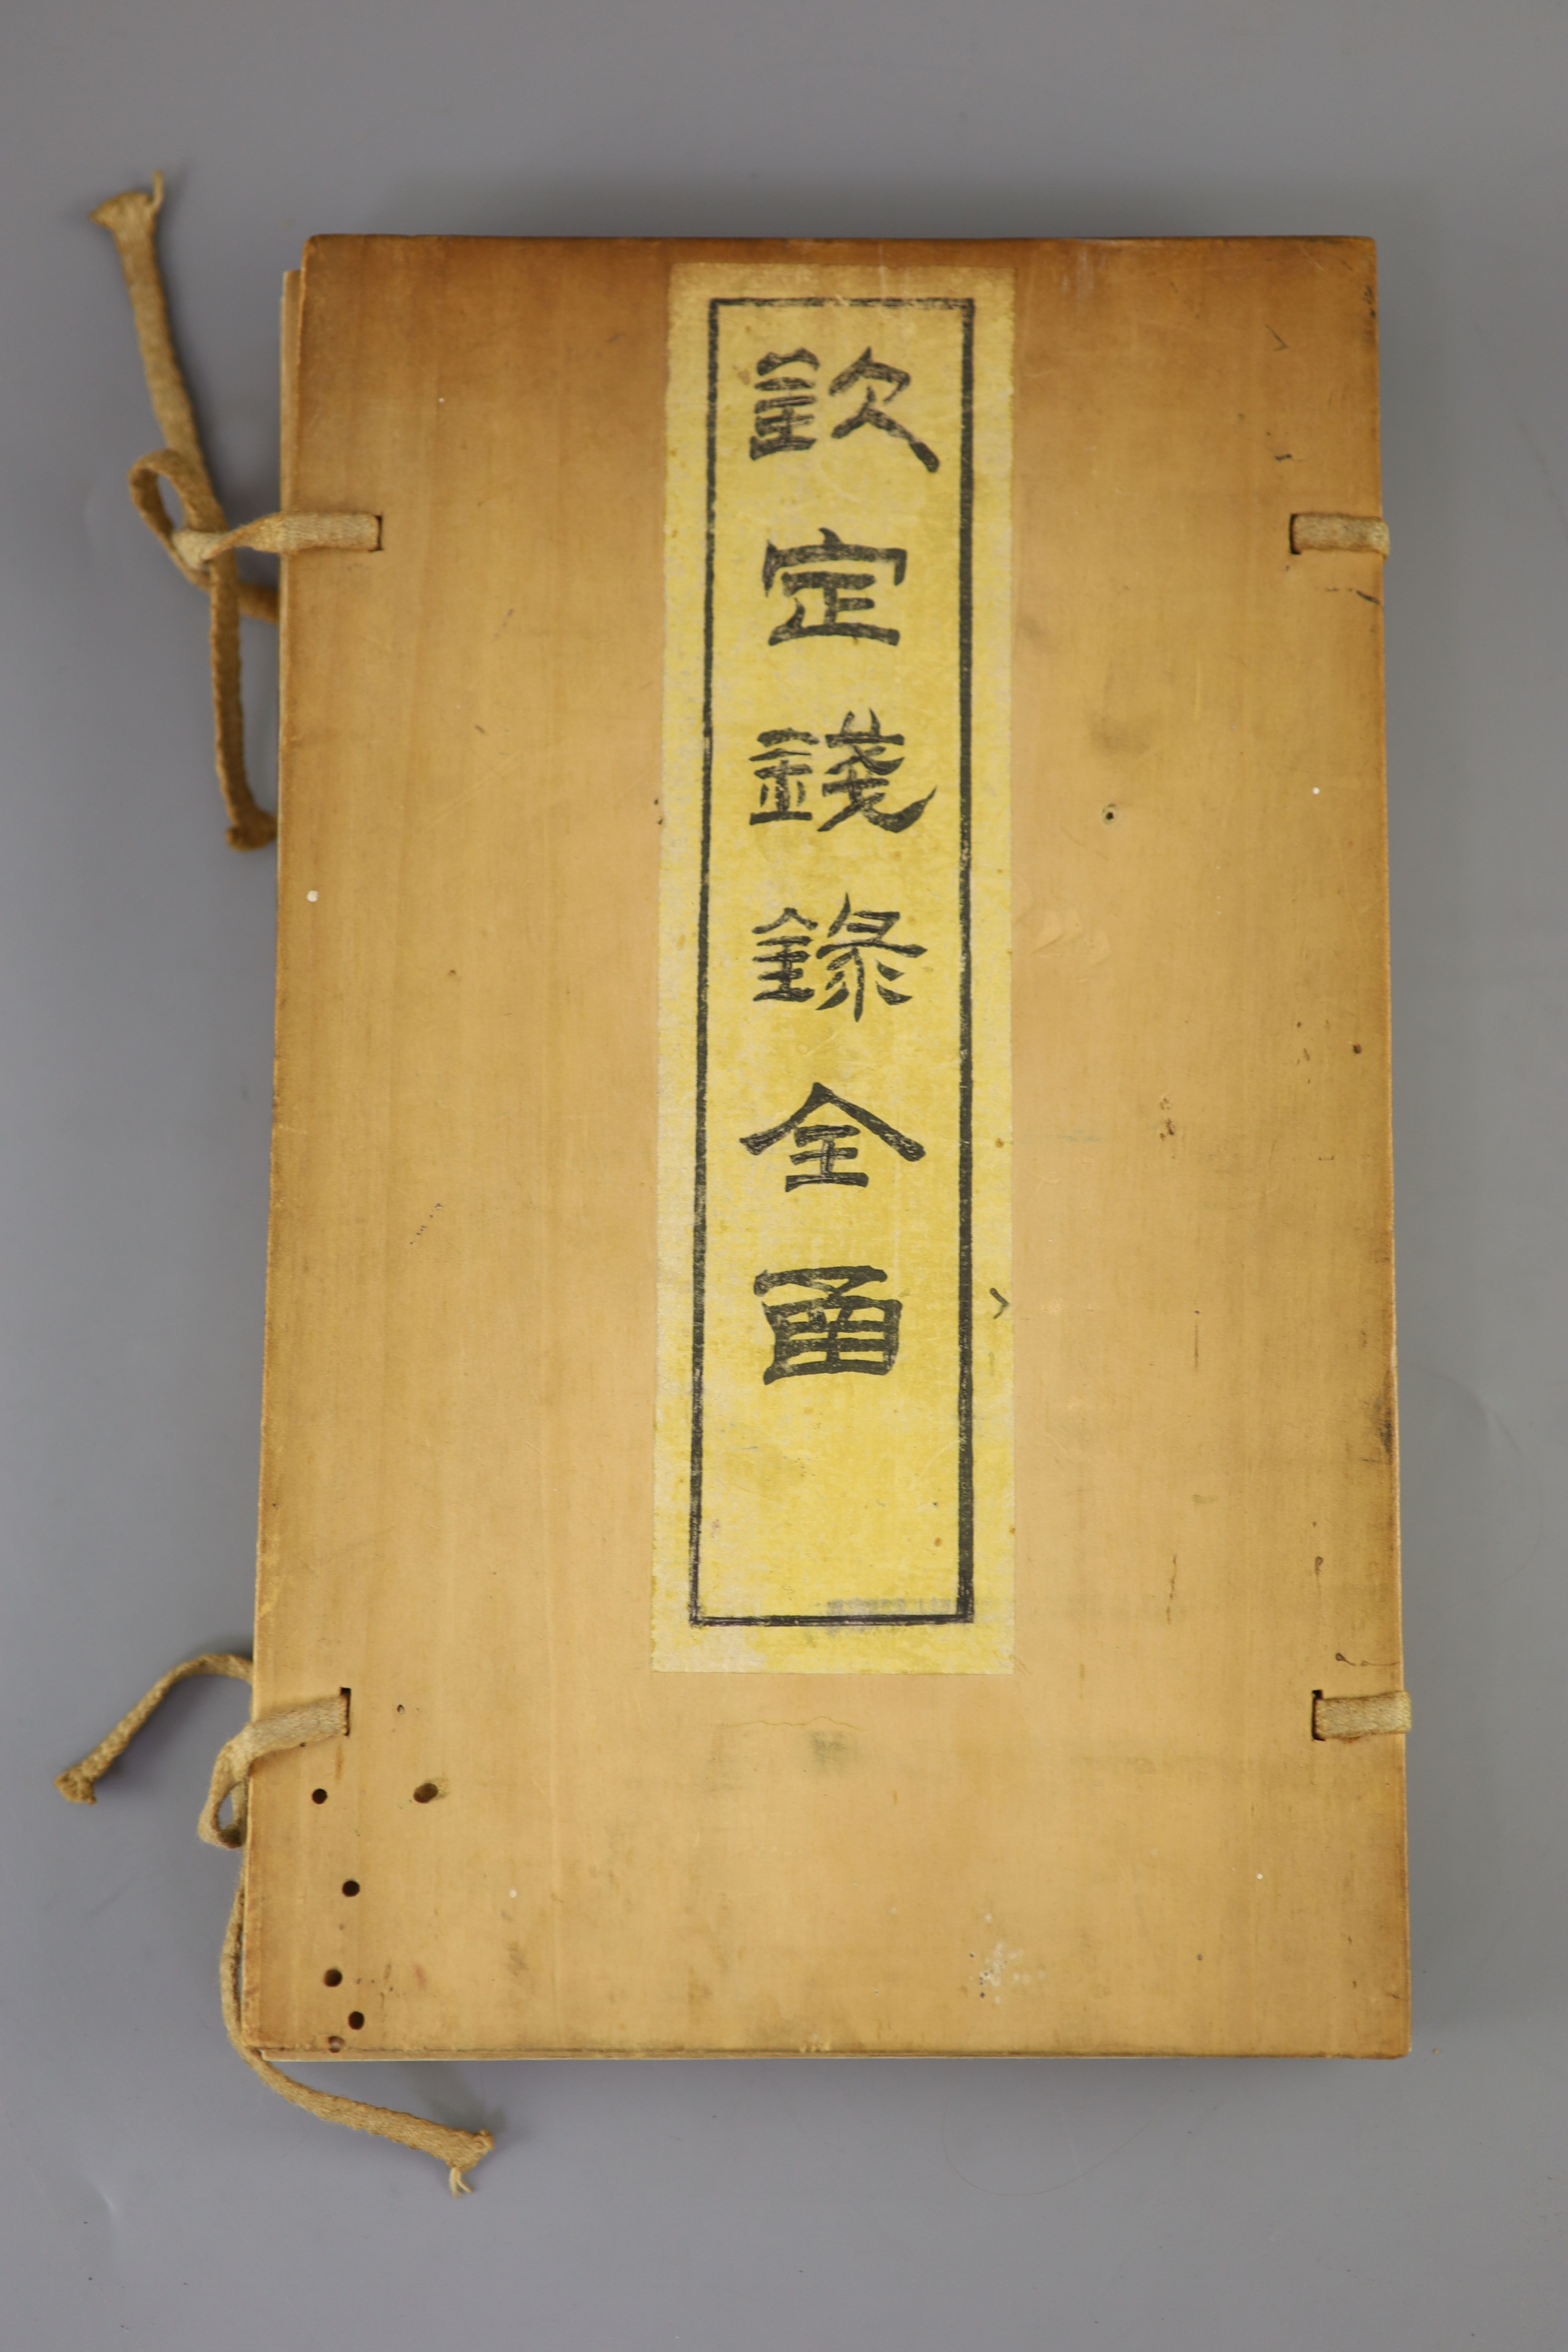 Liang Shizheng, 'Qin ding qian lu', Record of Chinese Coins published under Imperial Instructions, Provenance - A. T. Arber-Cooke